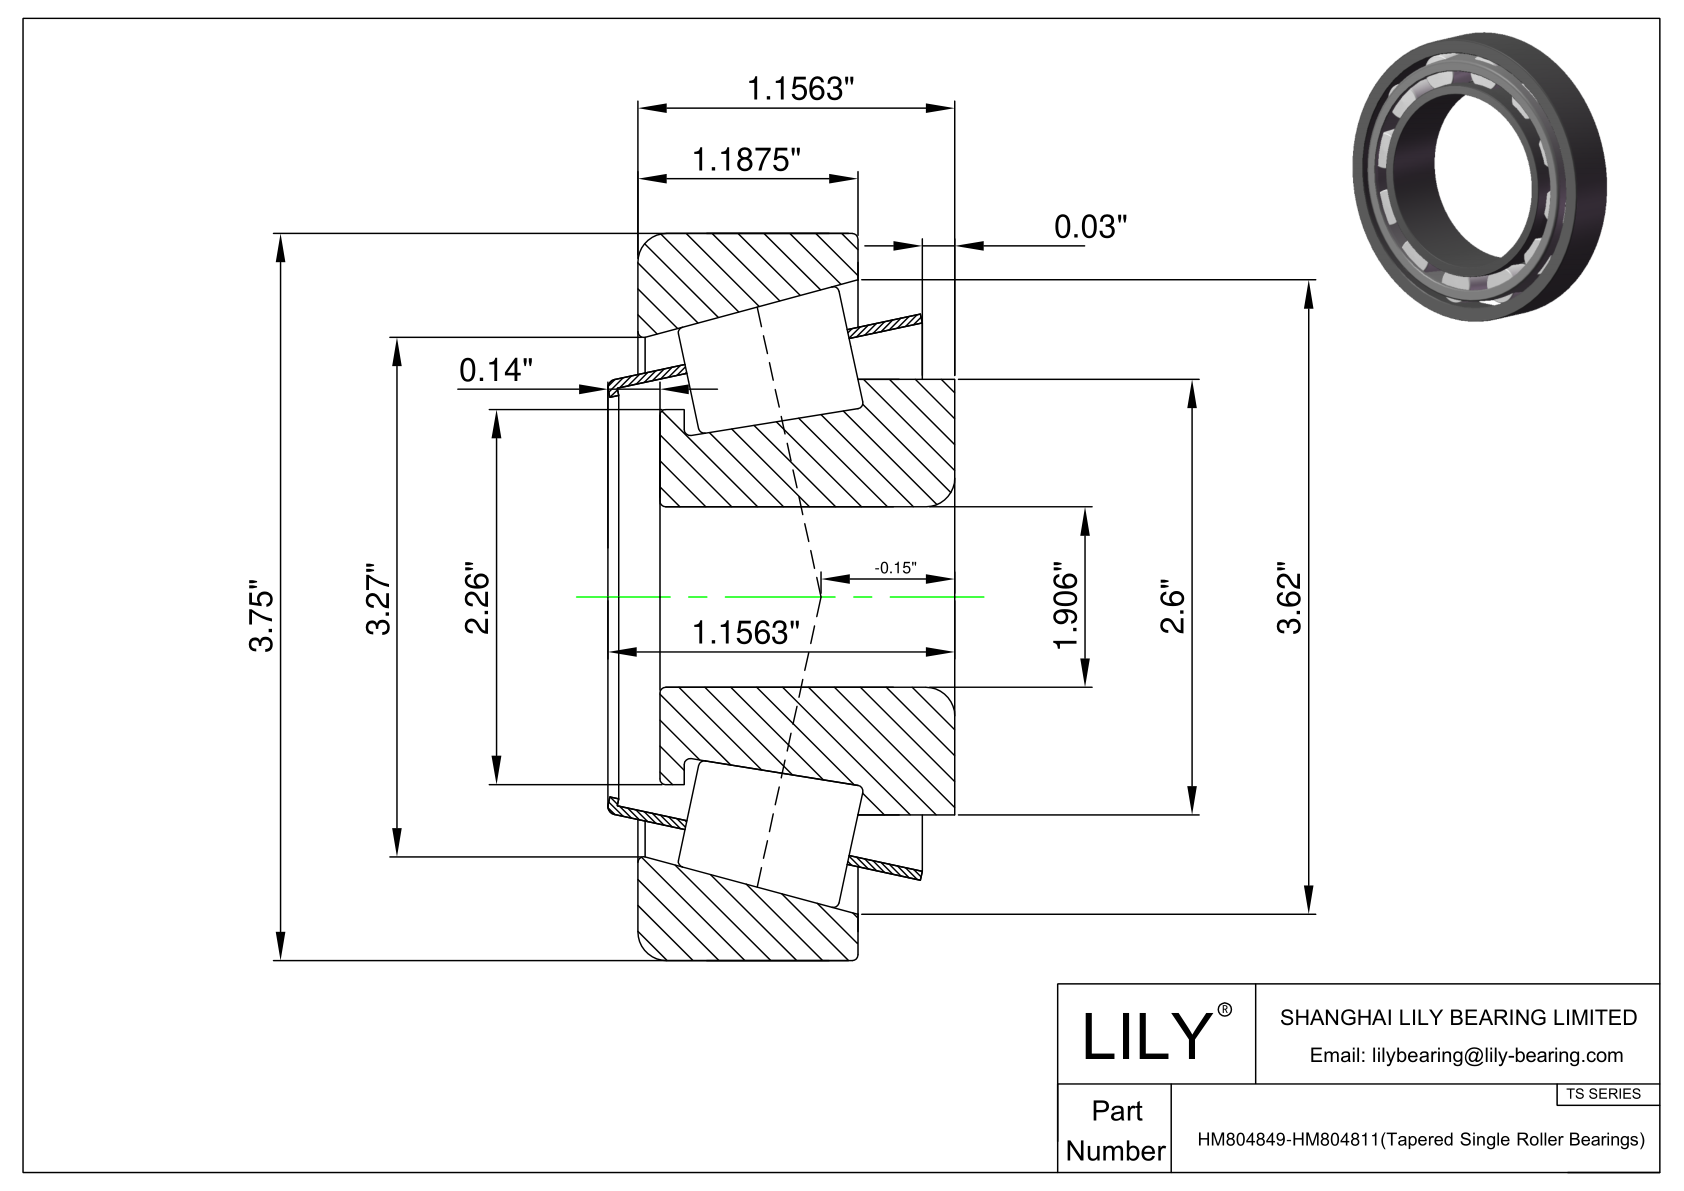 HM804849-HM804811 TS (Tapered Single Roller Bearings) (Imperial) cad drawing